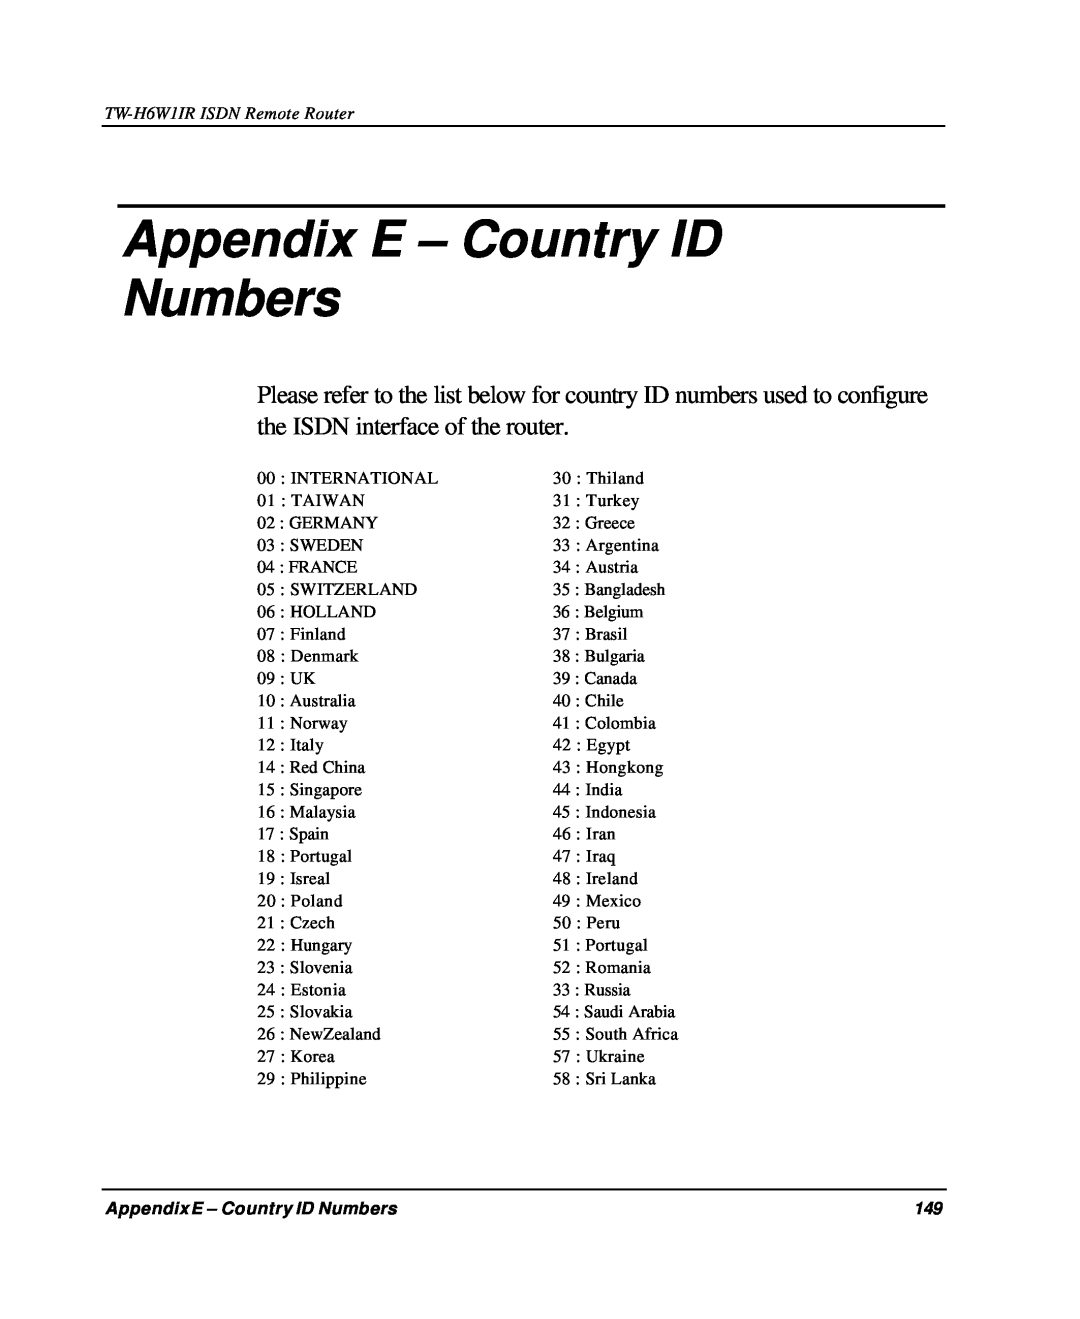 TRENDnet TW-H6W1IR manual Appendix E - Country ID Numbers 